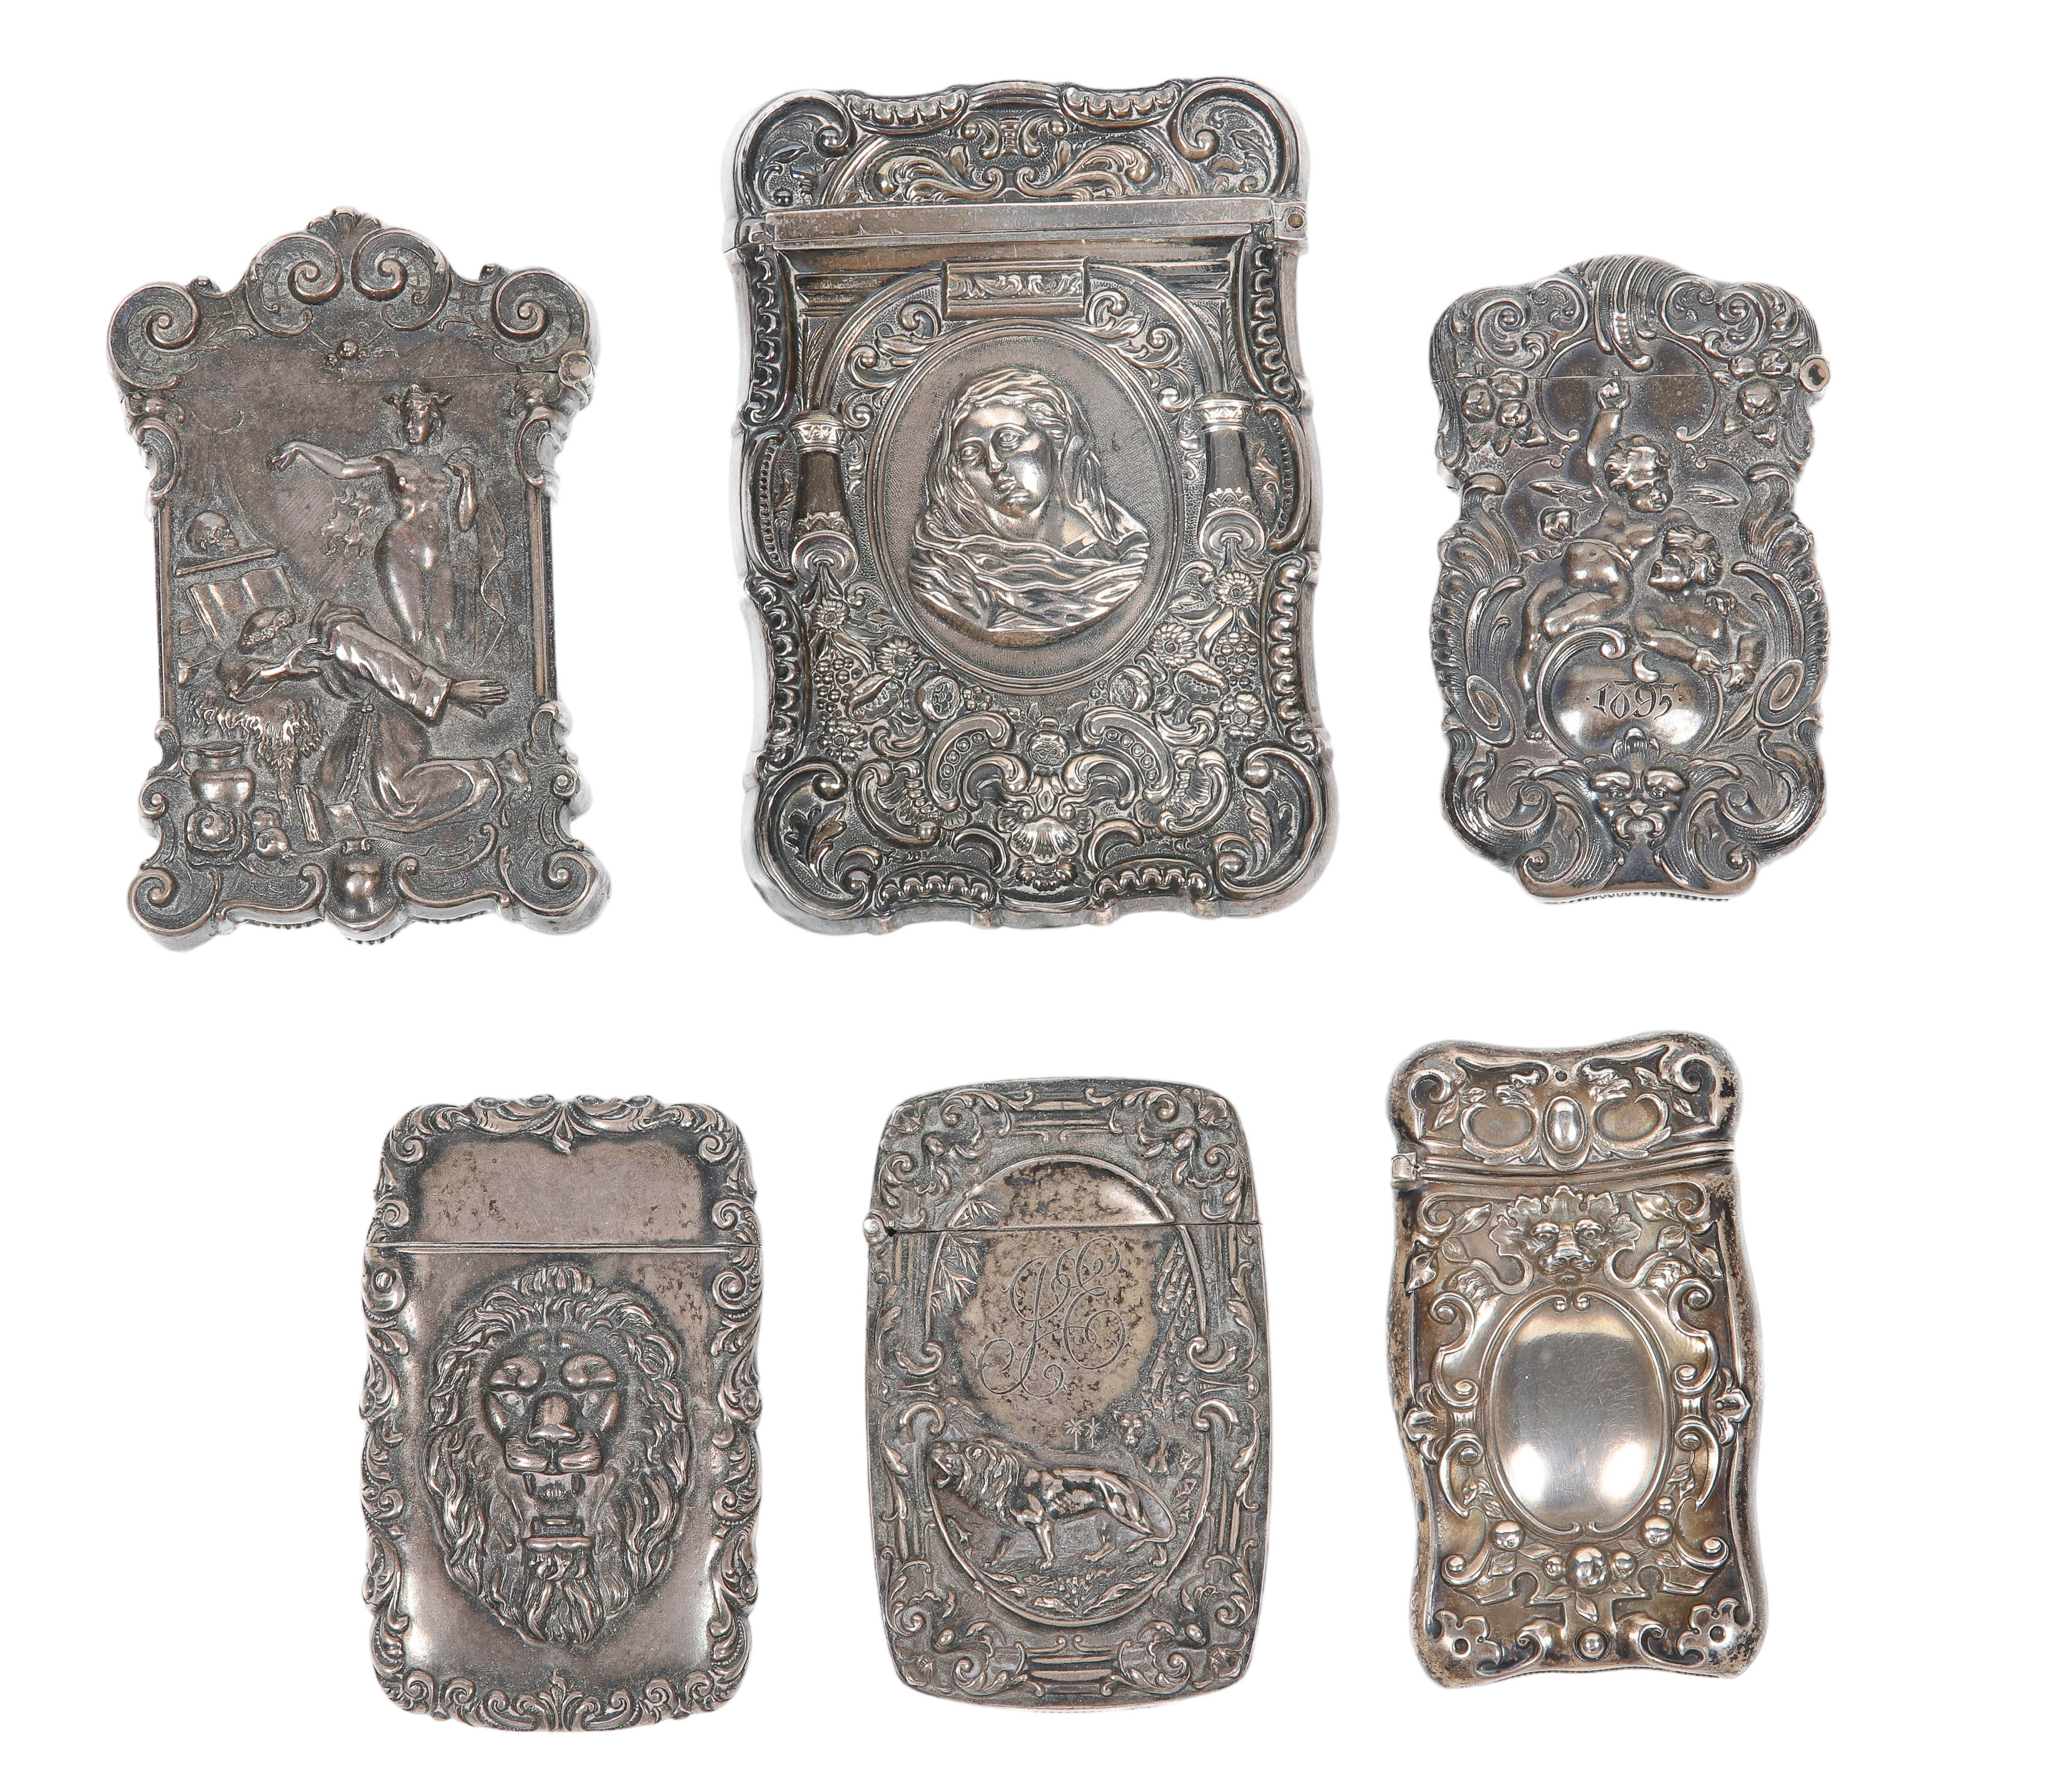  6 Sterling repousse match and 2e1c4c